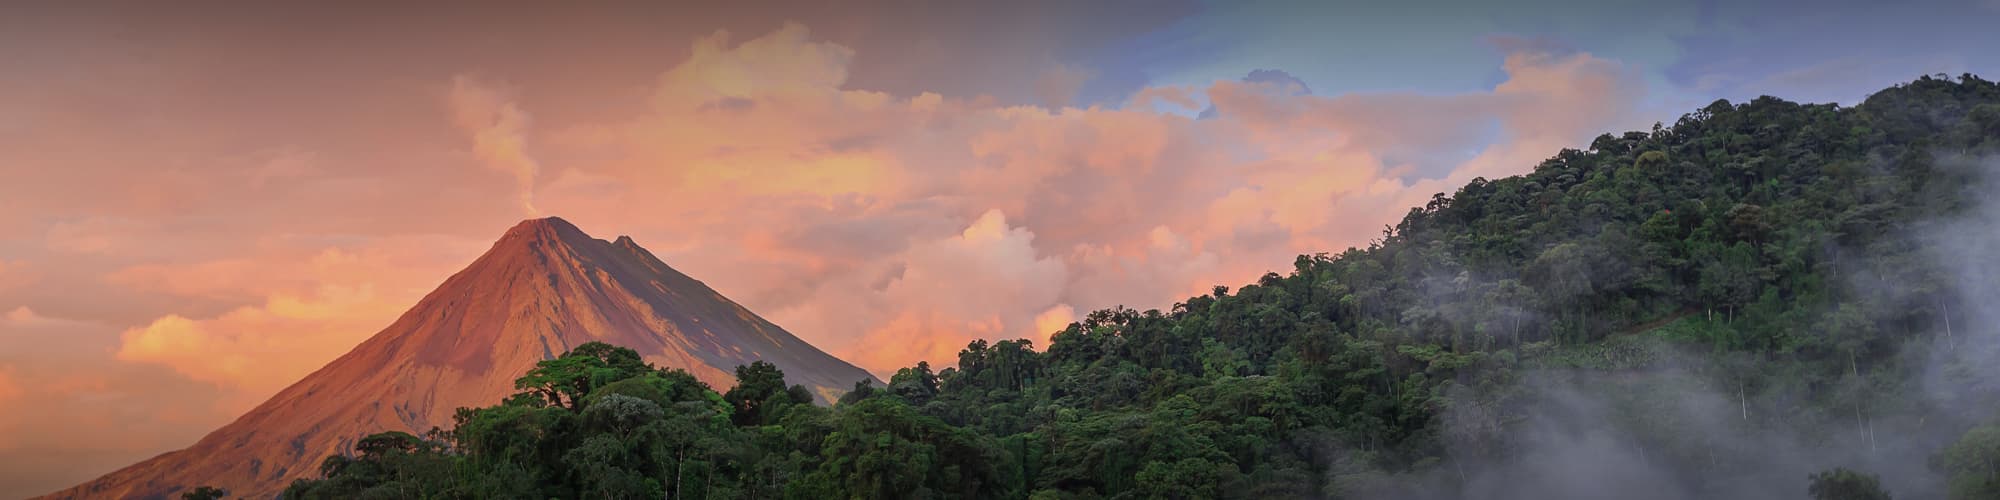 Voyage en groupe Costa Rica © photodiscoveries / Adobe Stock